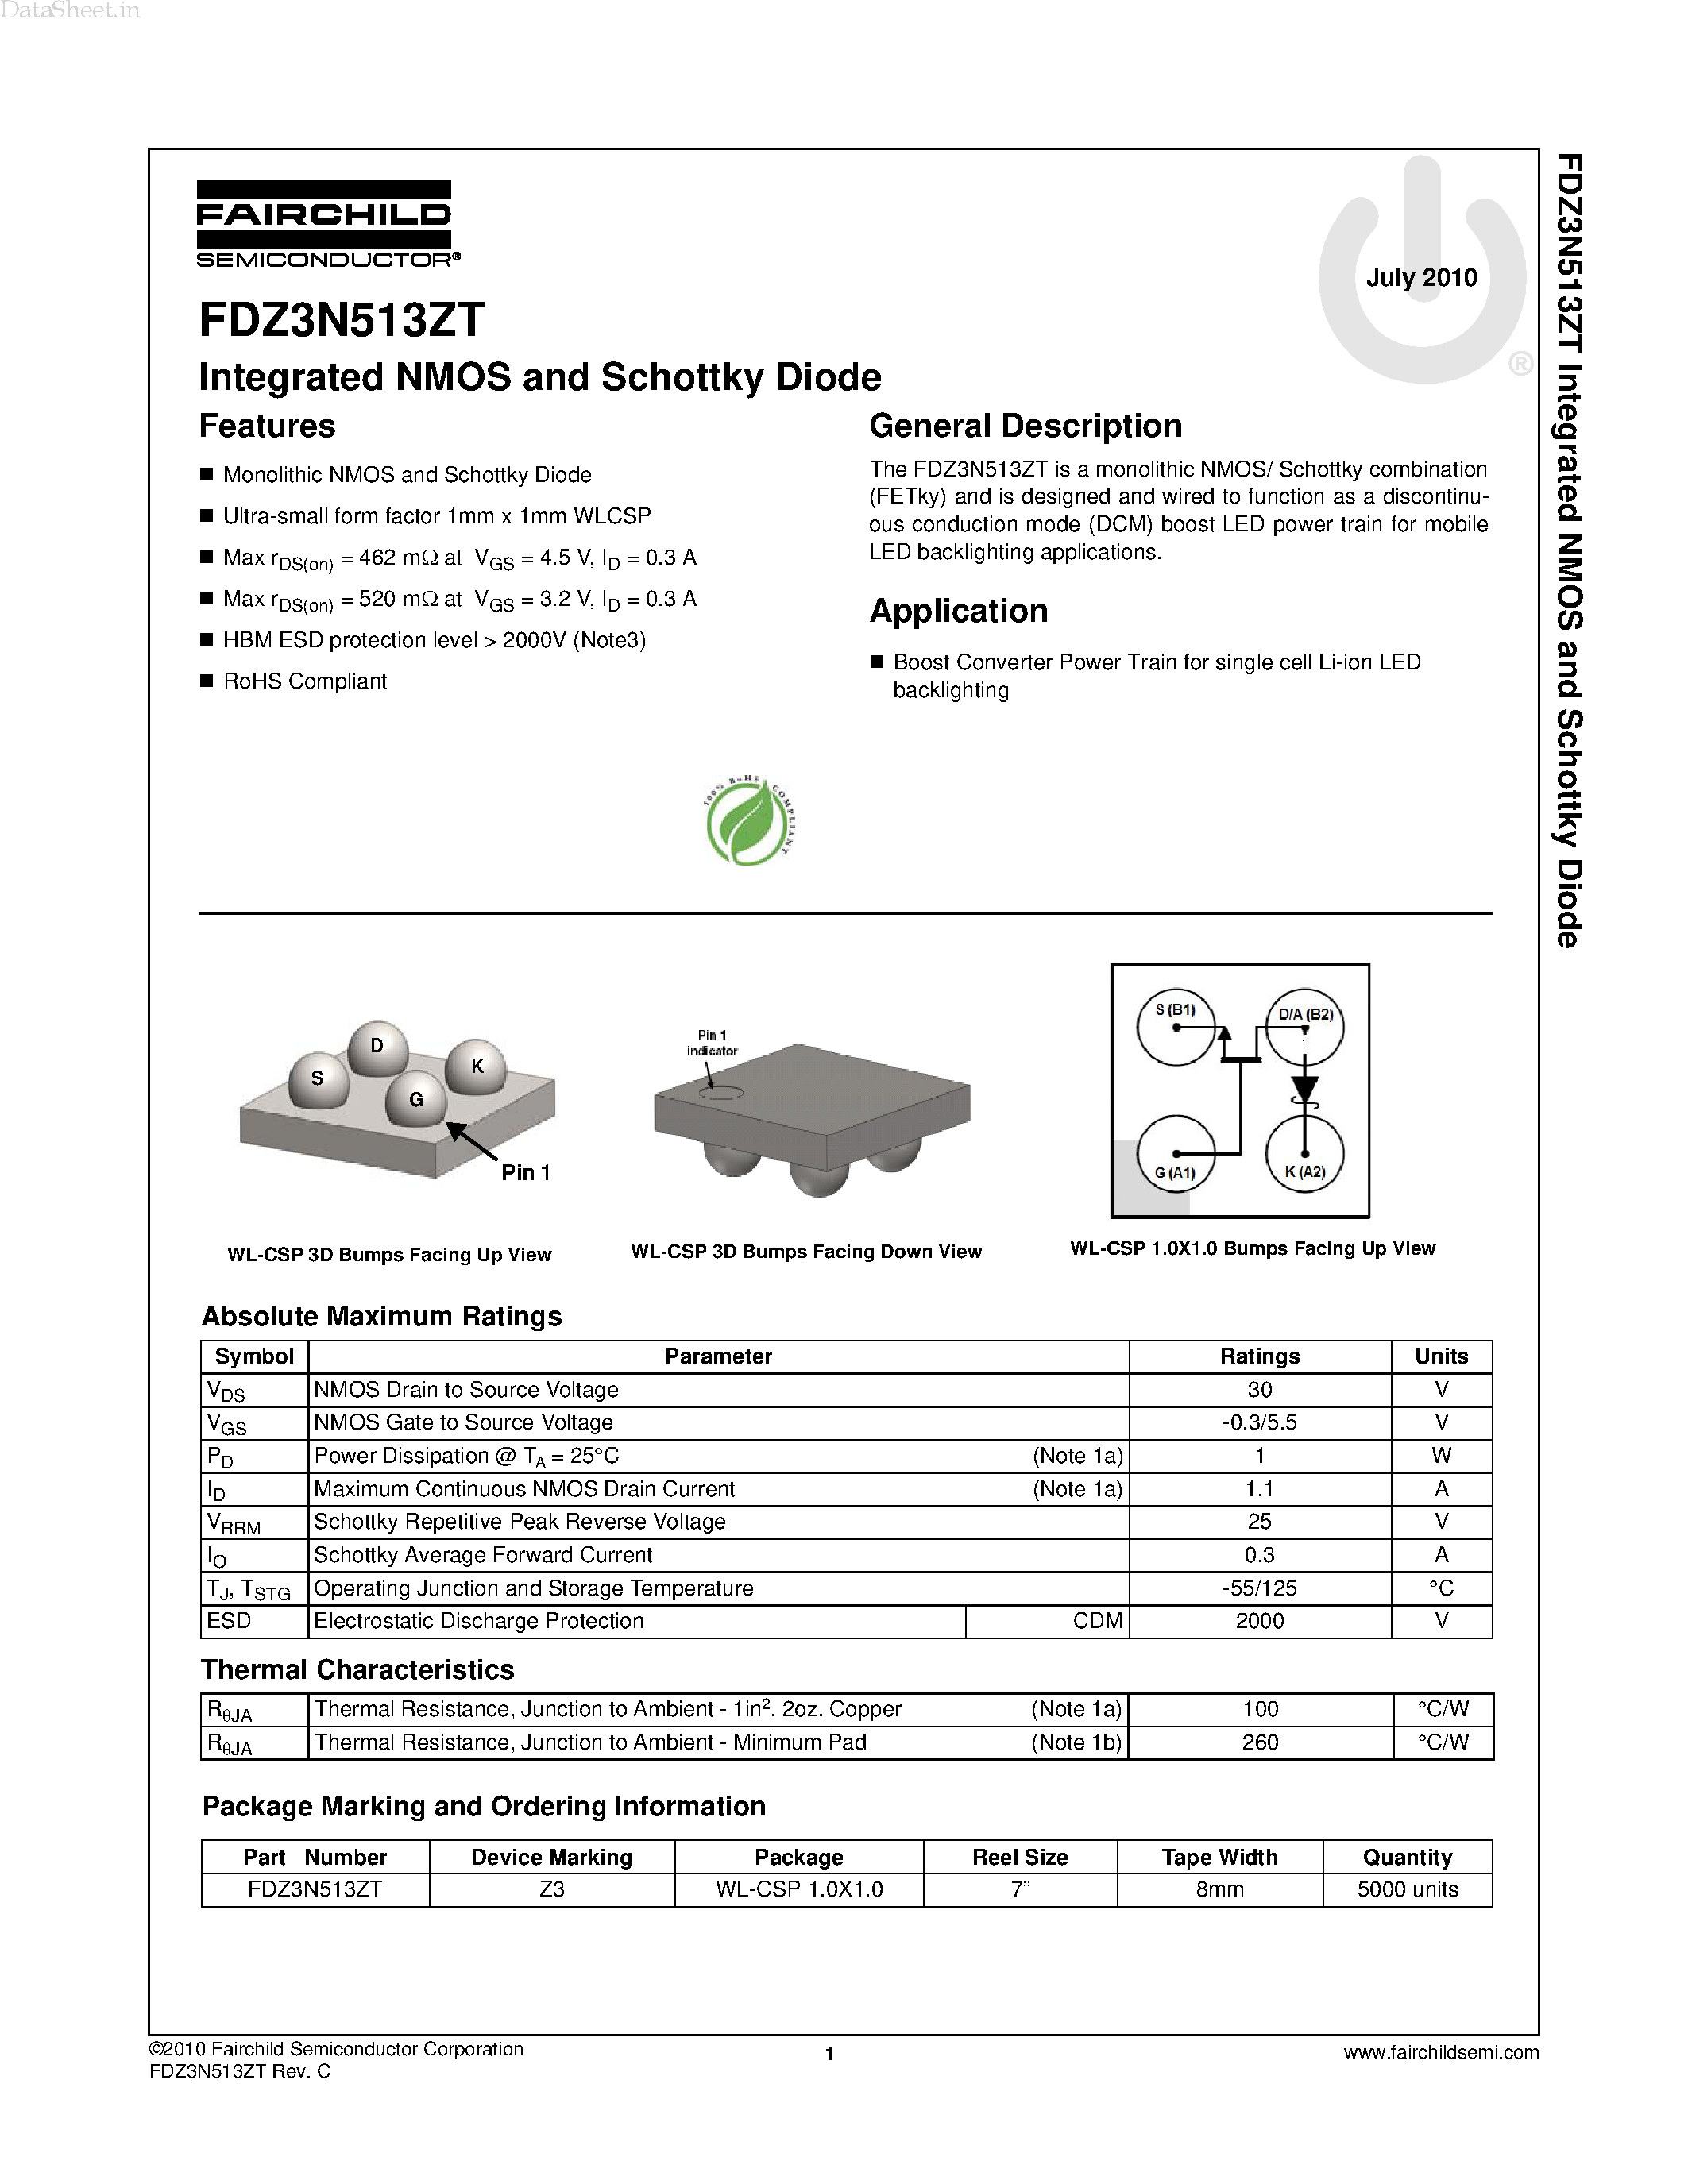 Datasheet FDZ3N513ZT - 30V Integrated NMOS And Schottky Diode page 1